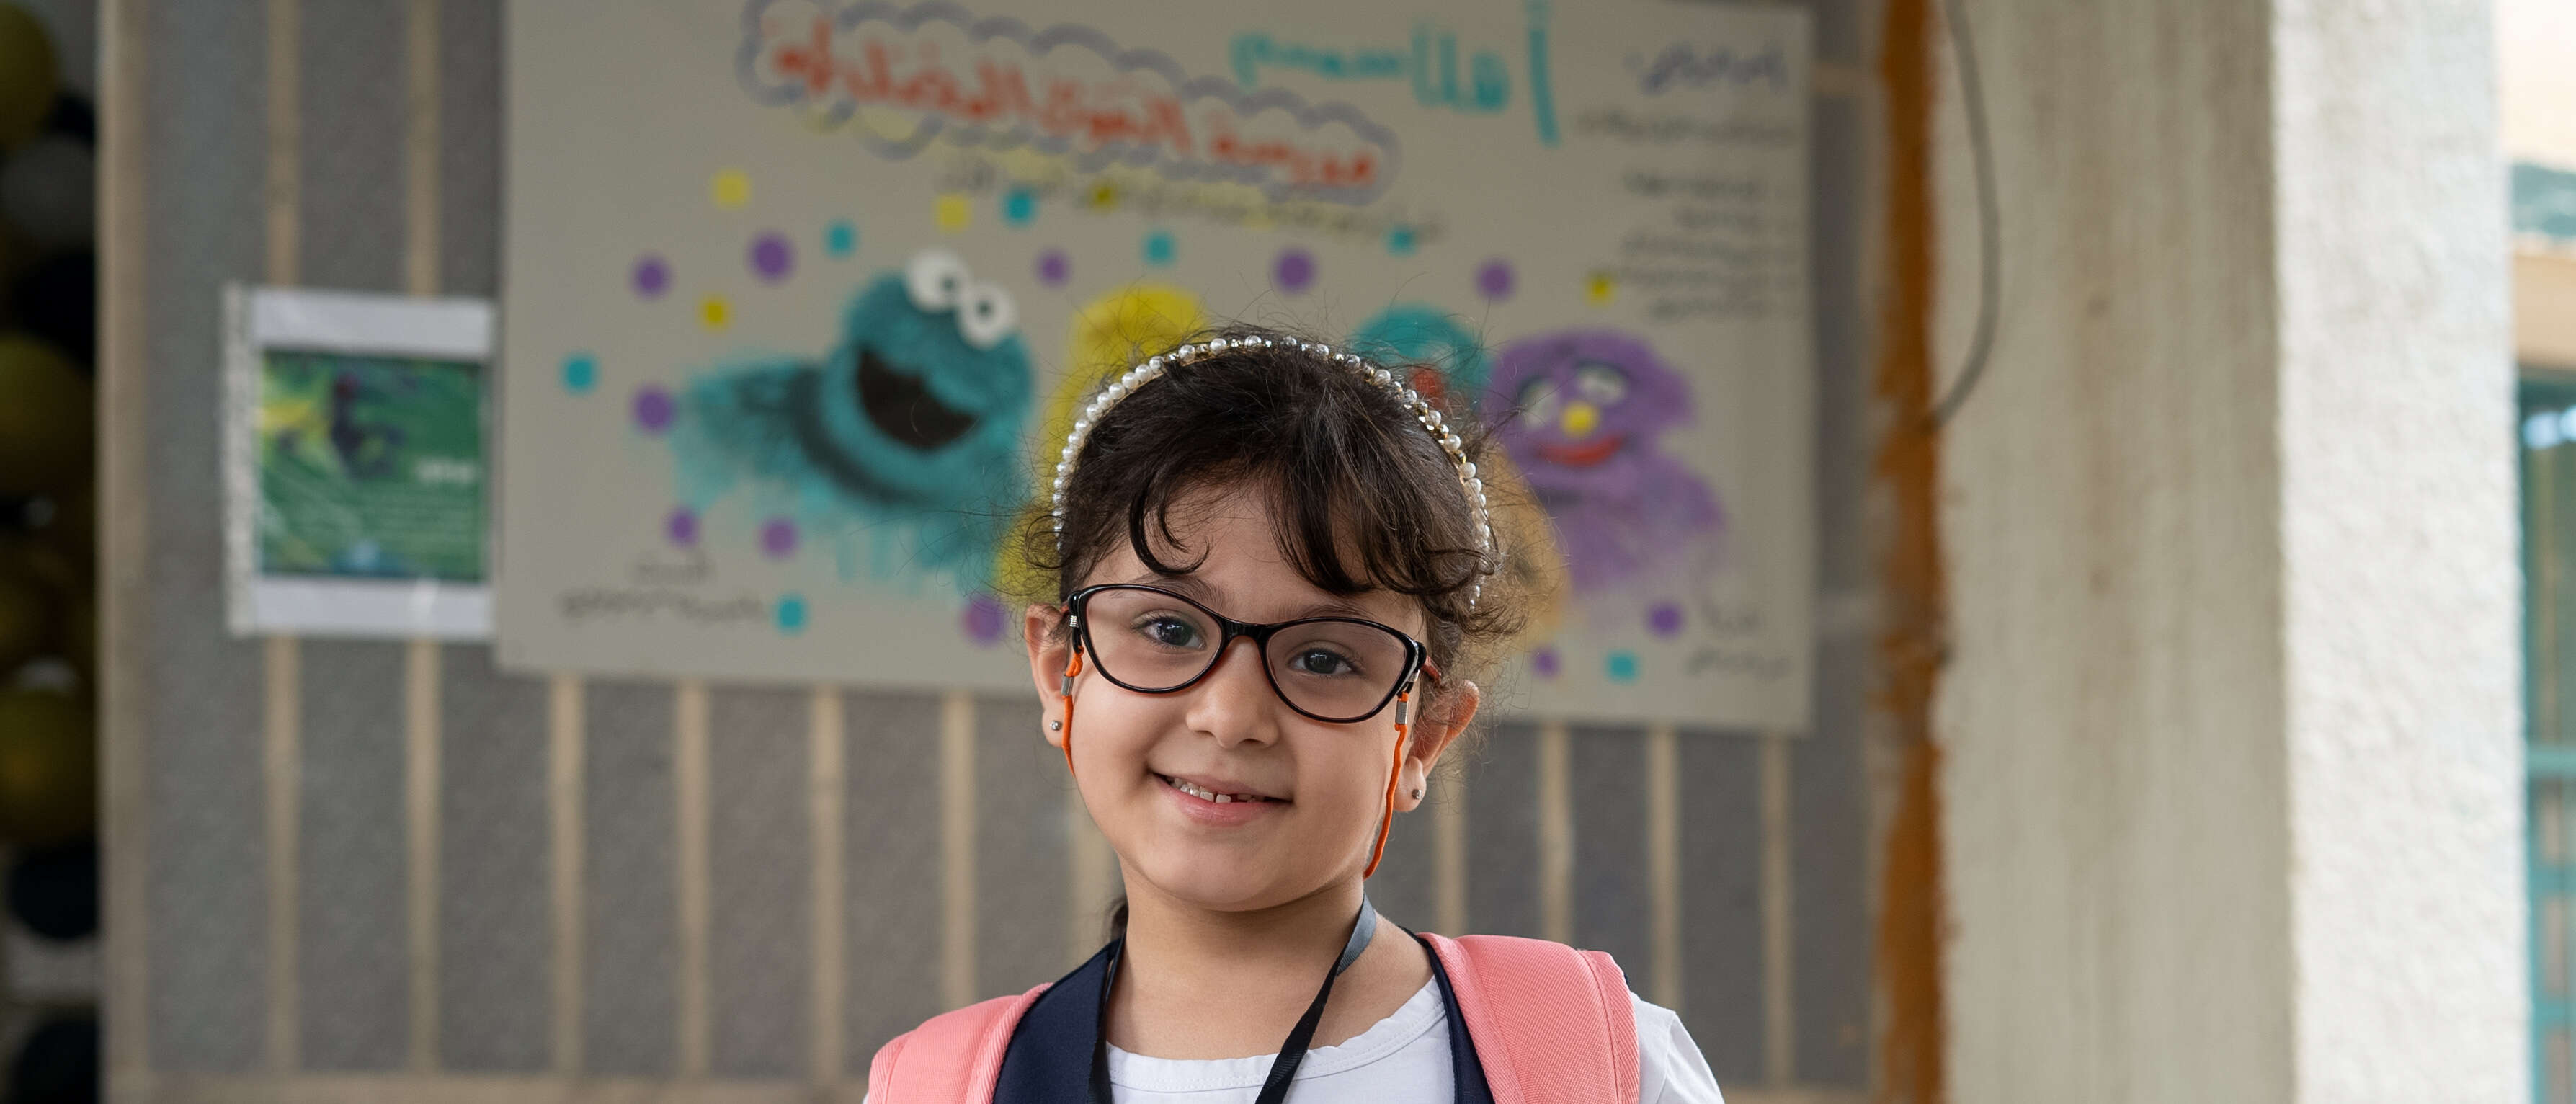 A girl in glasses poses for a photo in an IRC classroom in Iraq.